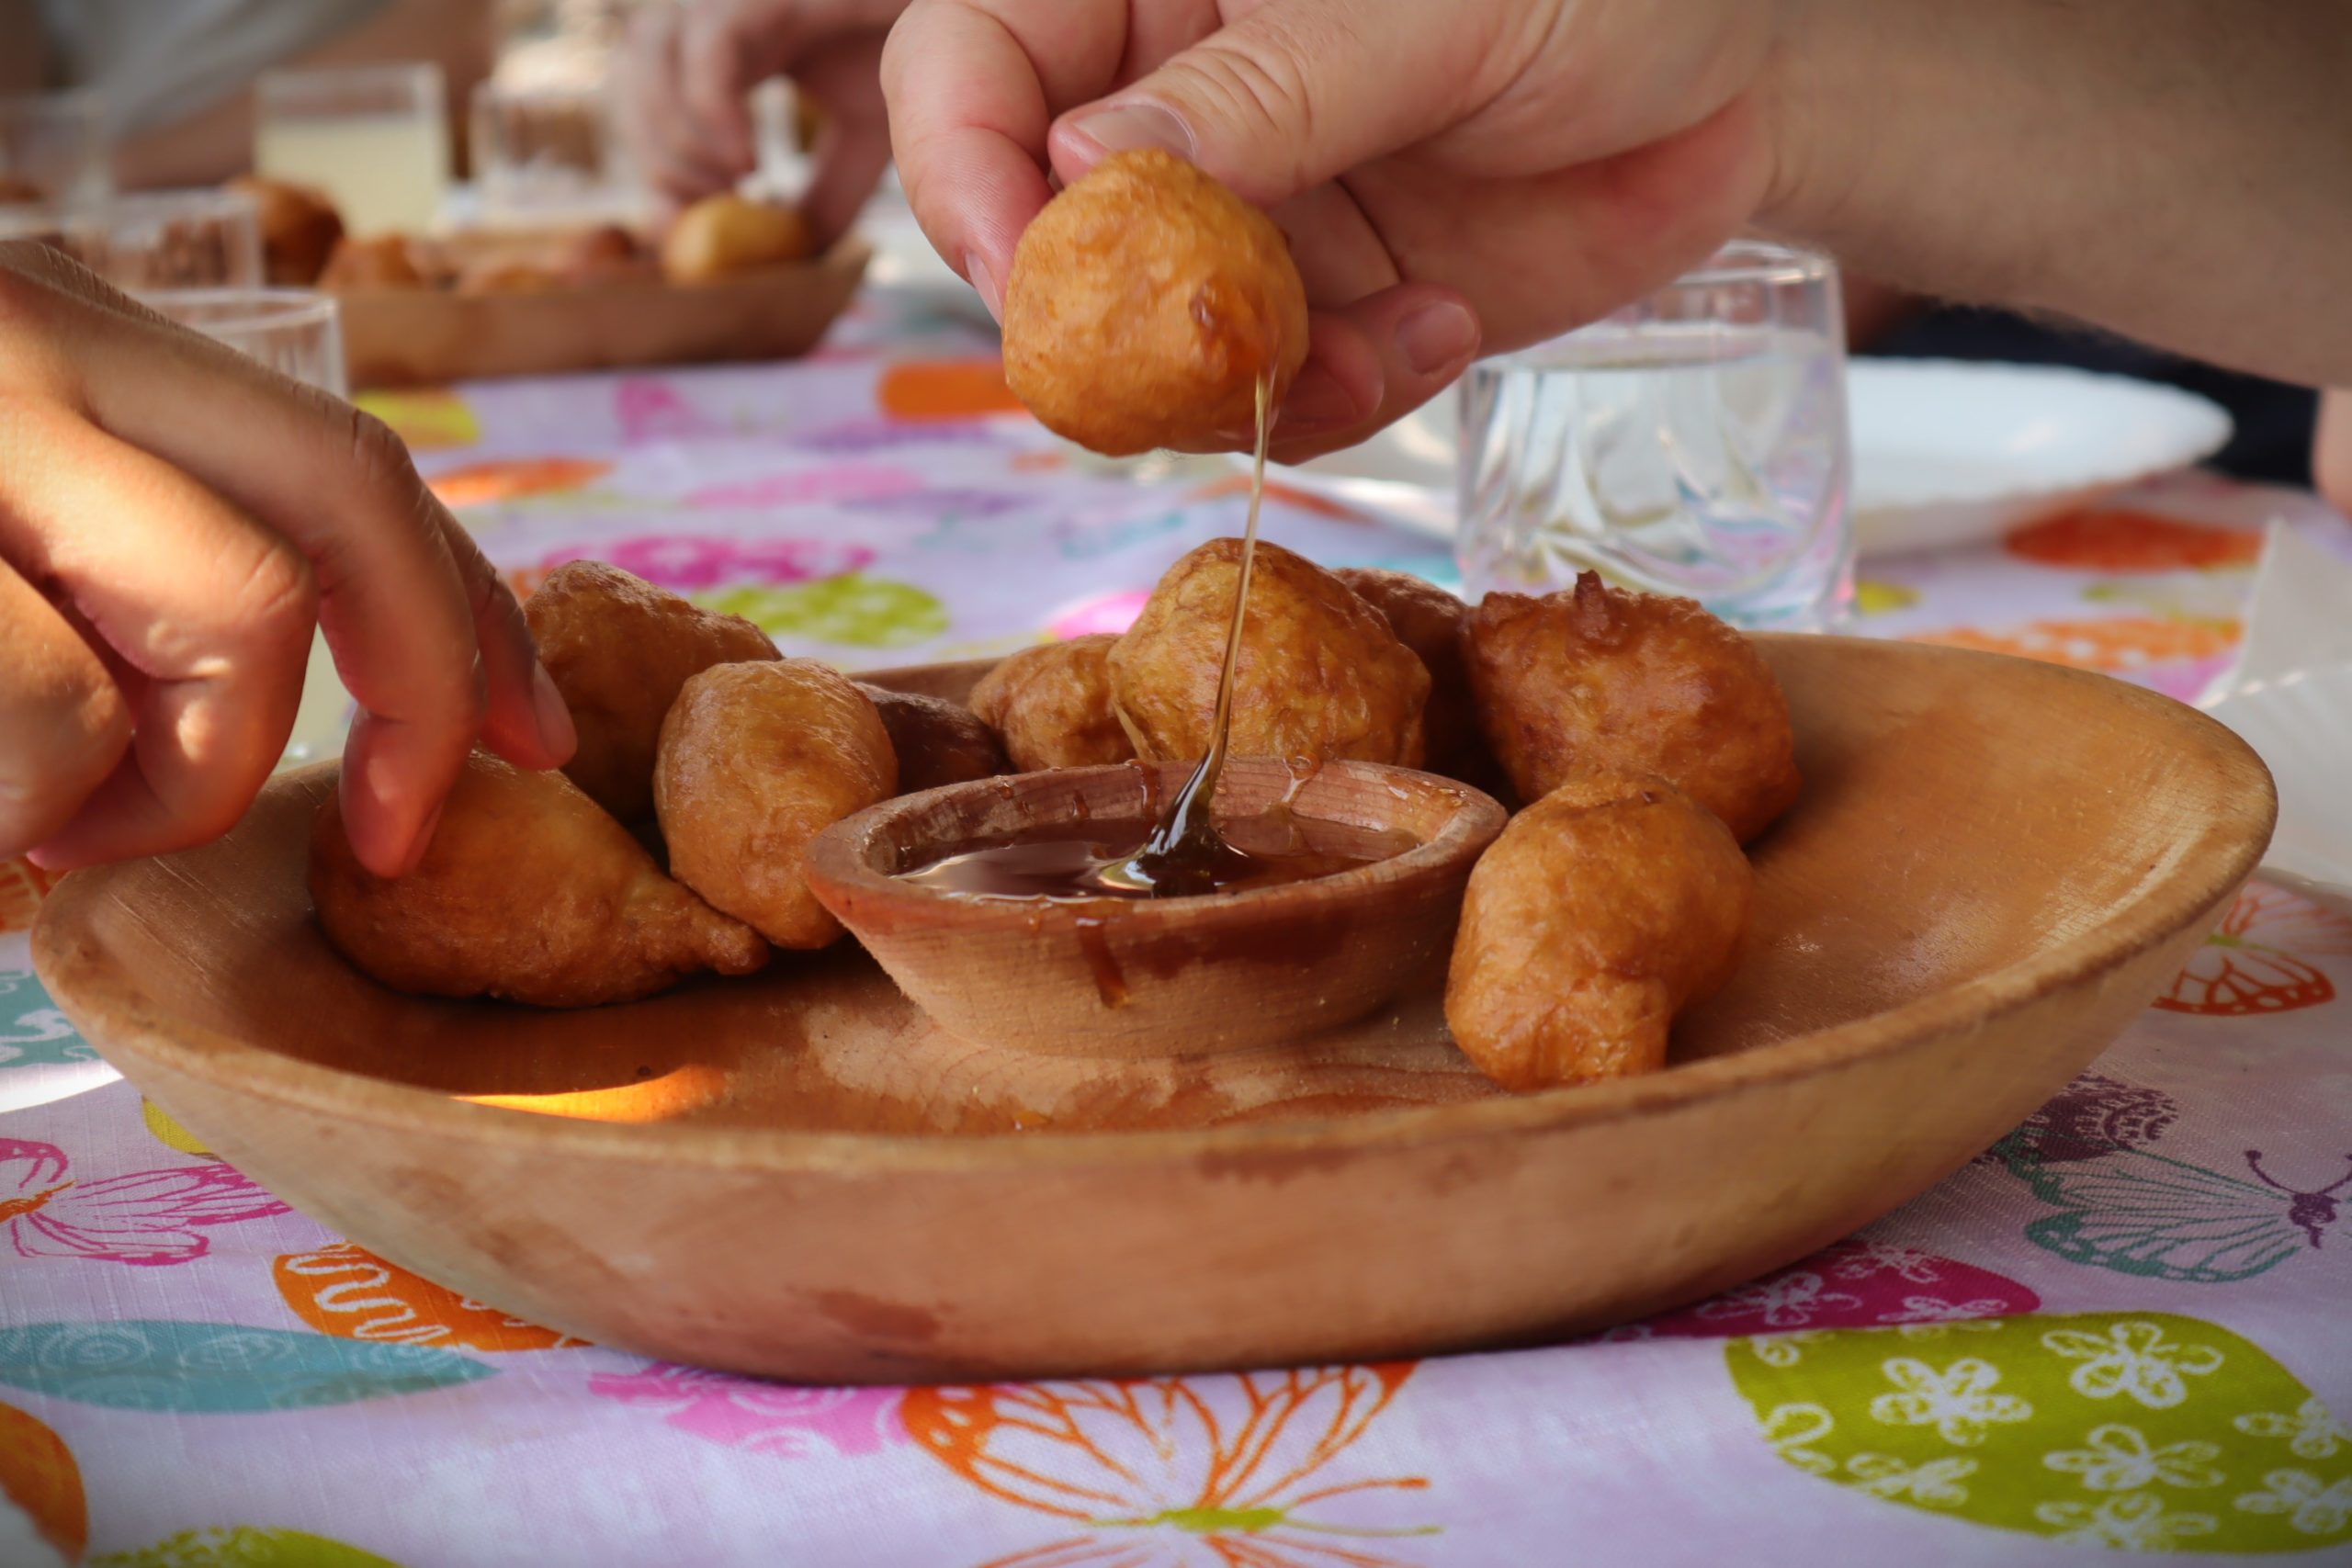 Undiscovered Tastes #4 – a recipe for priganice doughballs from Montenegro